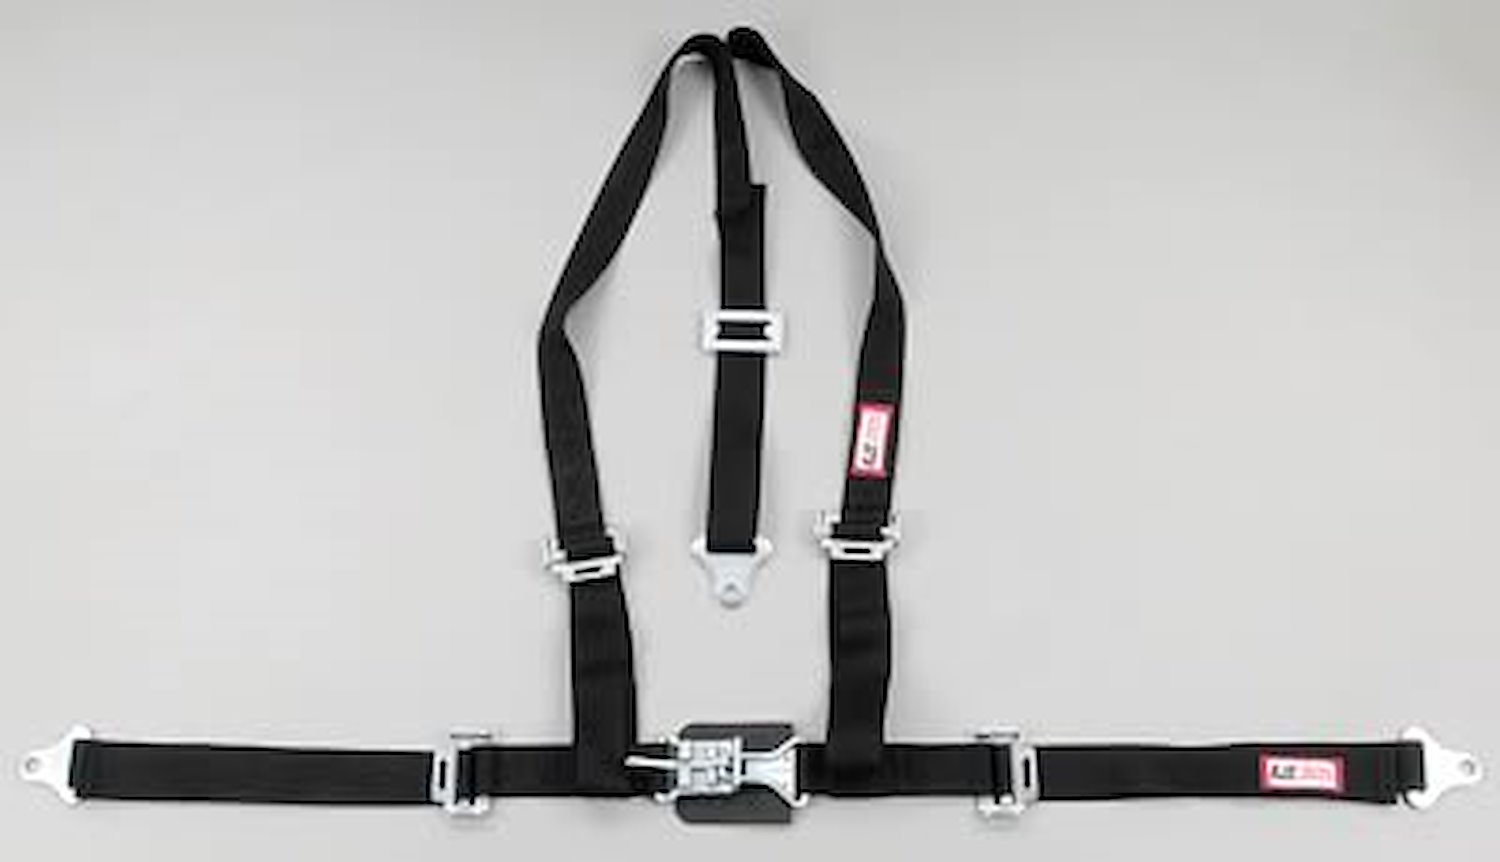 NON-SFI L&L HARNESS 3 PULL UP Lap BELT SEWN IN 2 S.H. Y FLOOR Mount ALL WRAP ENDS GRAY